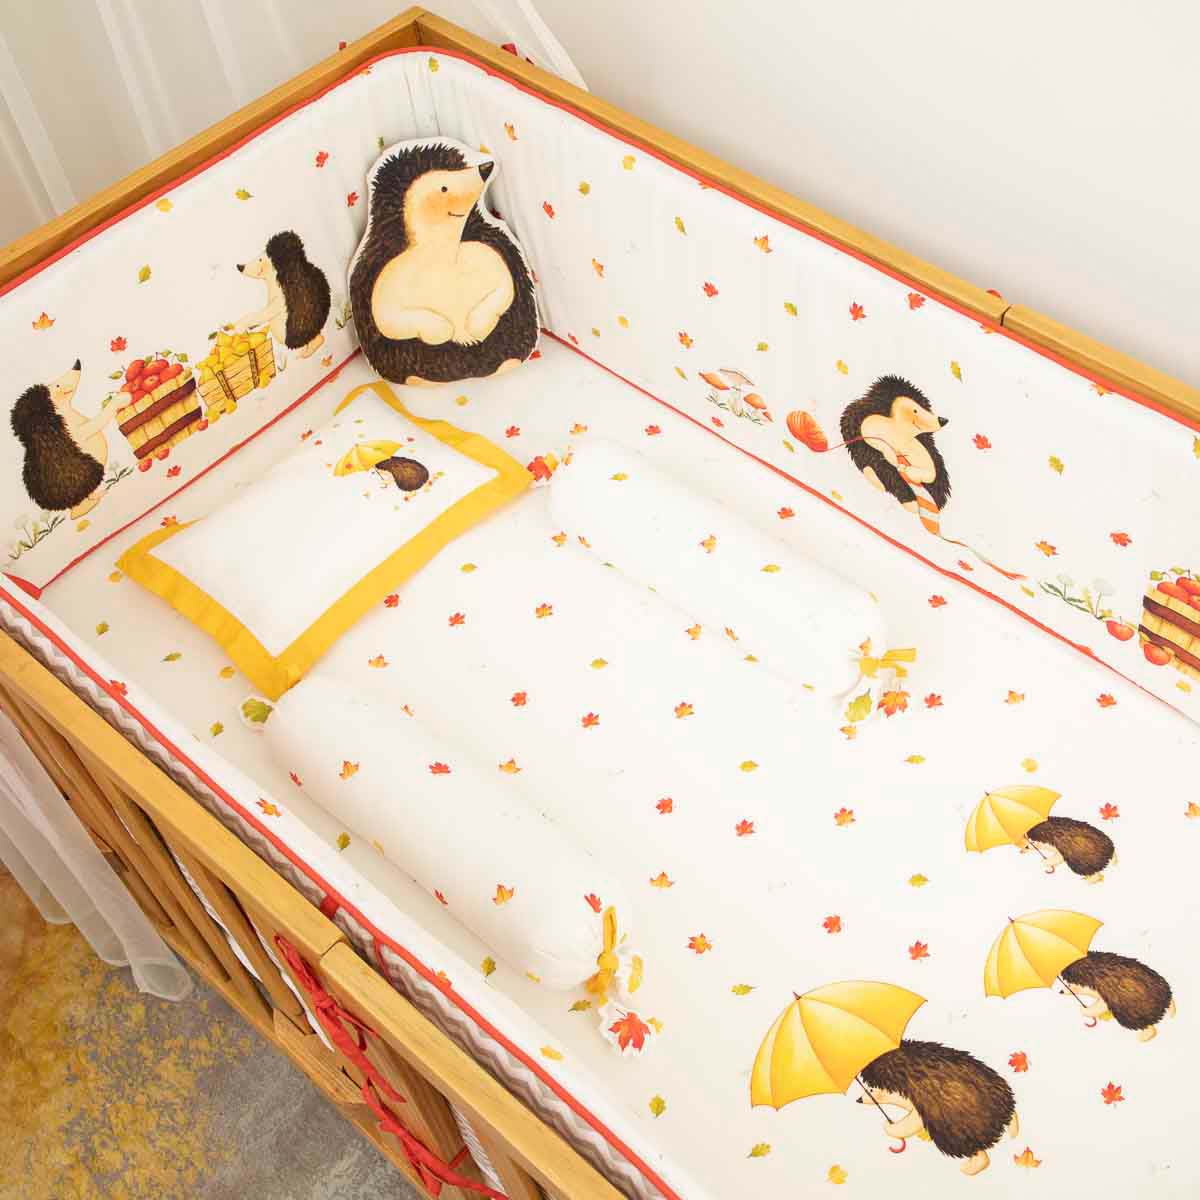 Hoggy The Hedgehog- Umbrella Hoggy - Cot Bedding Set With / Without Bumper